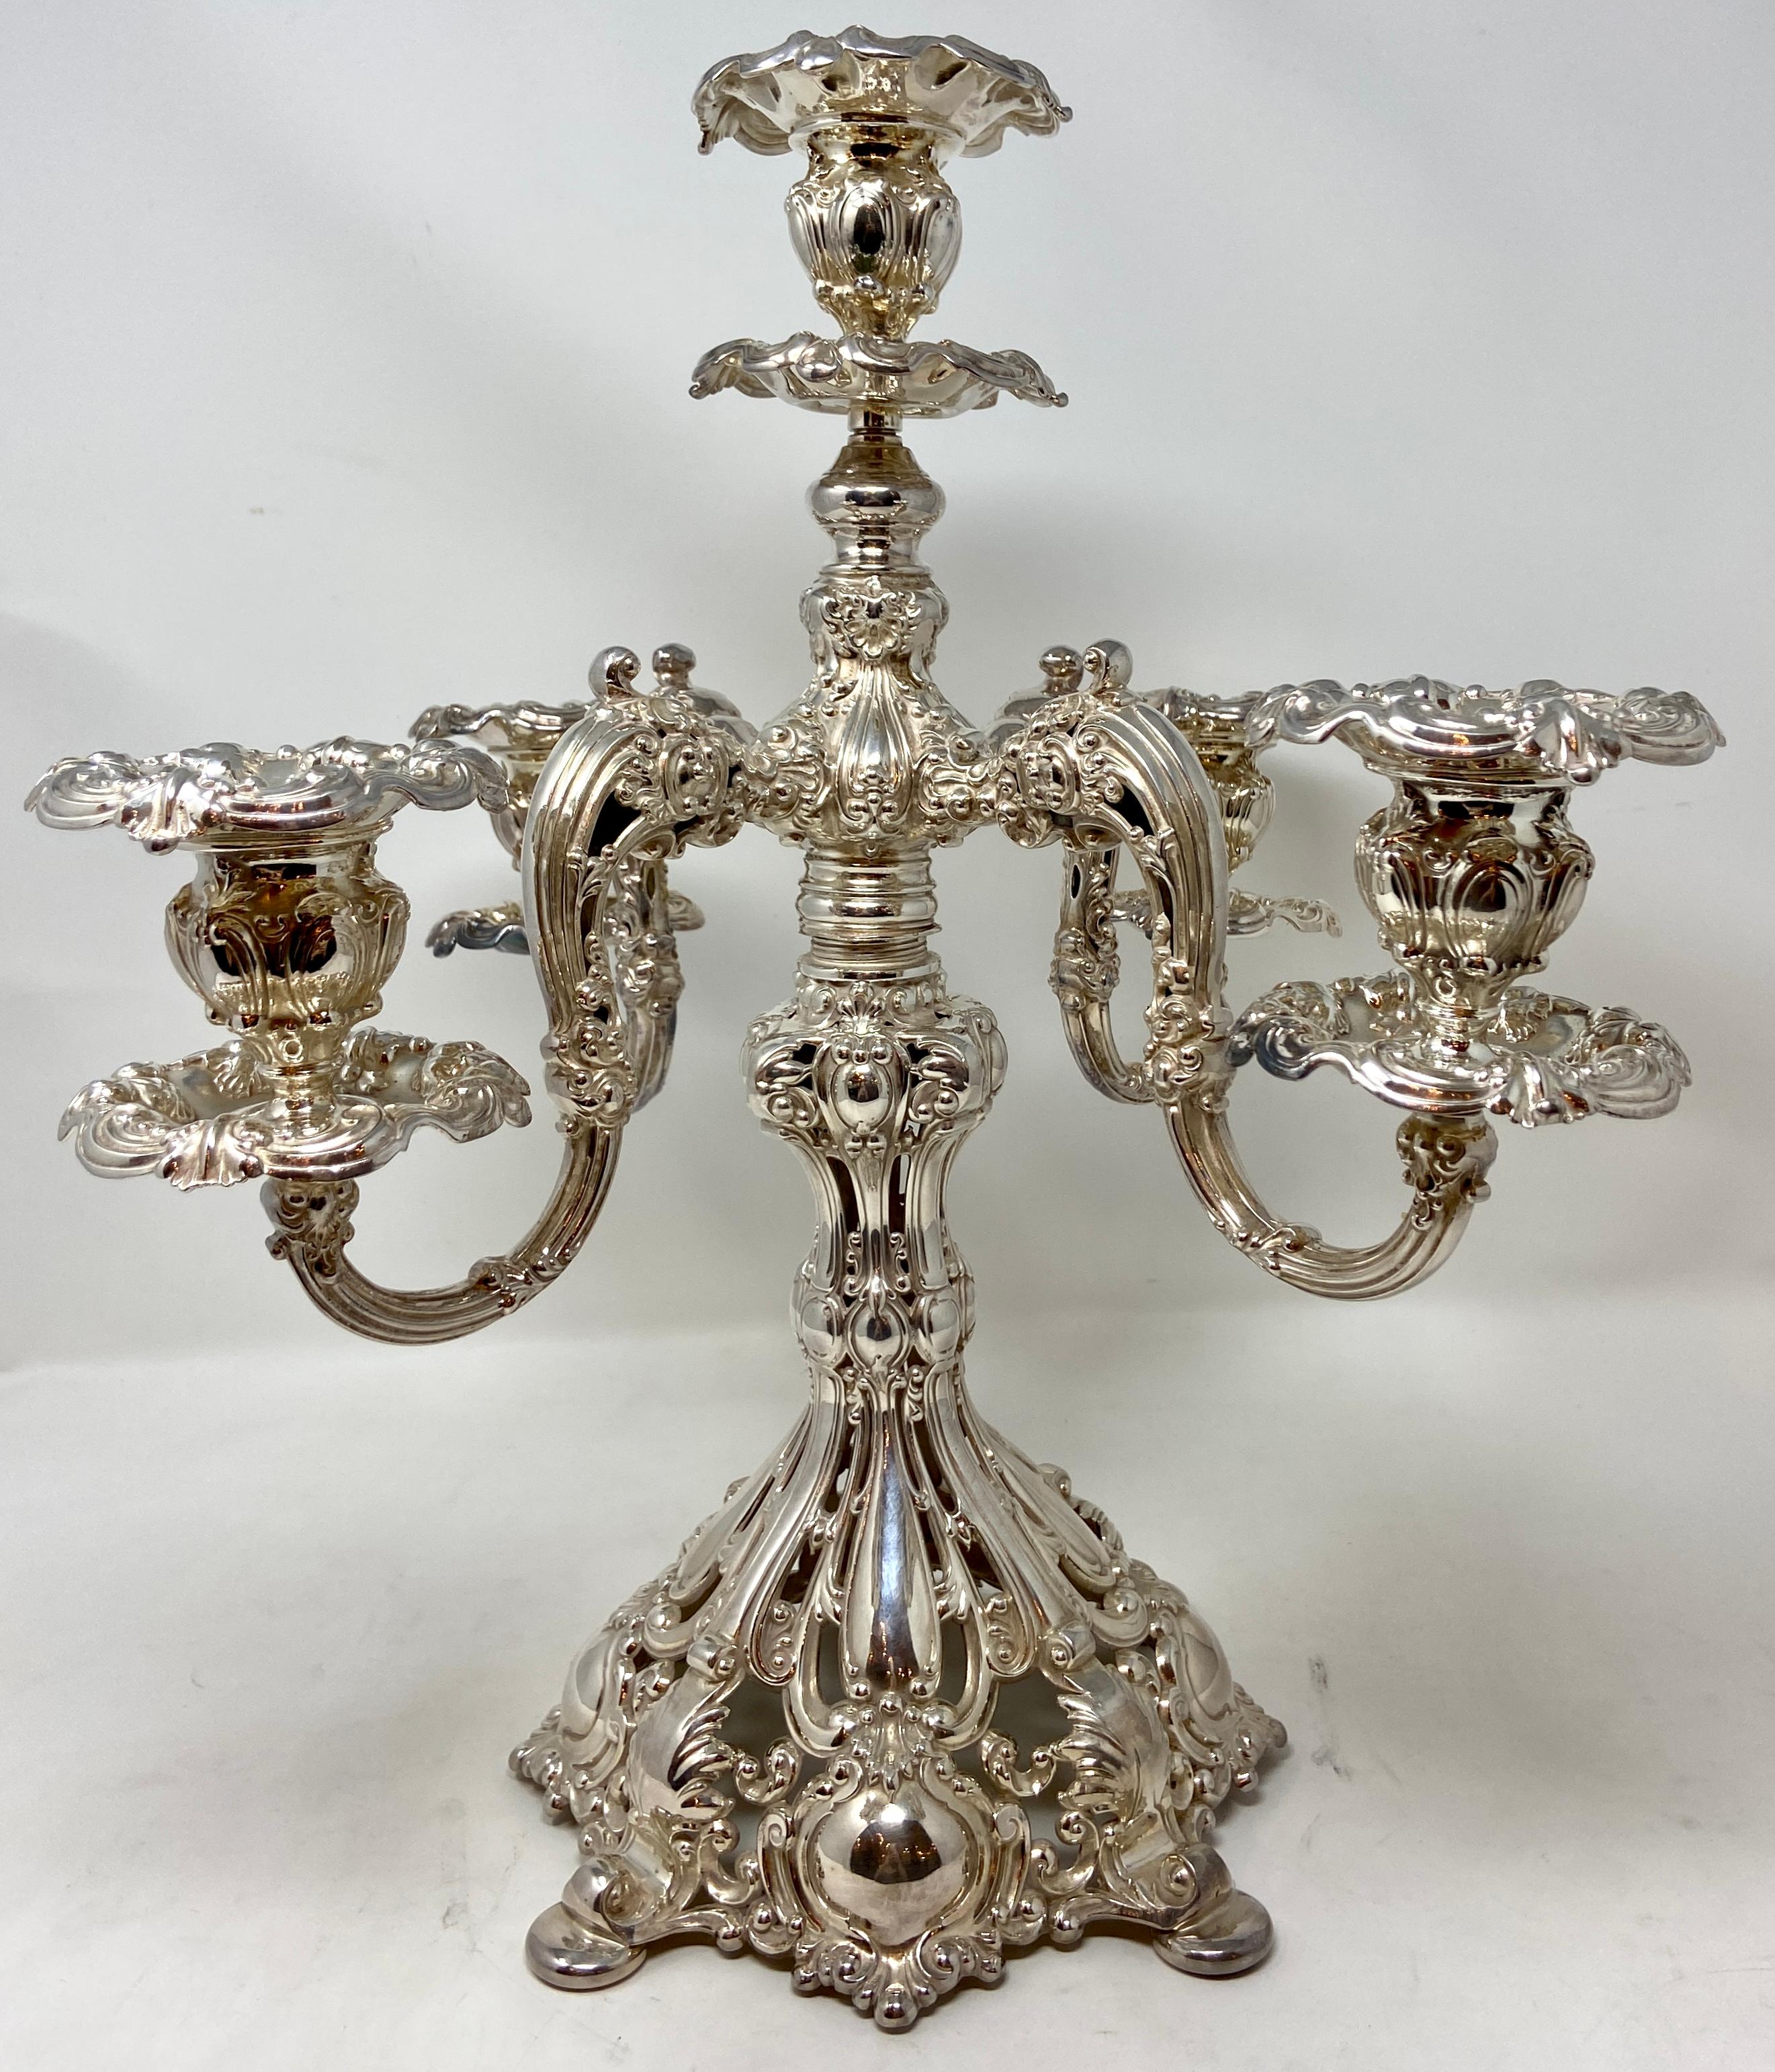 Pair of substantial antique American Rococo style silver-plated 5 cup candelabra with magnificently intricate detail, Circa 1890's.